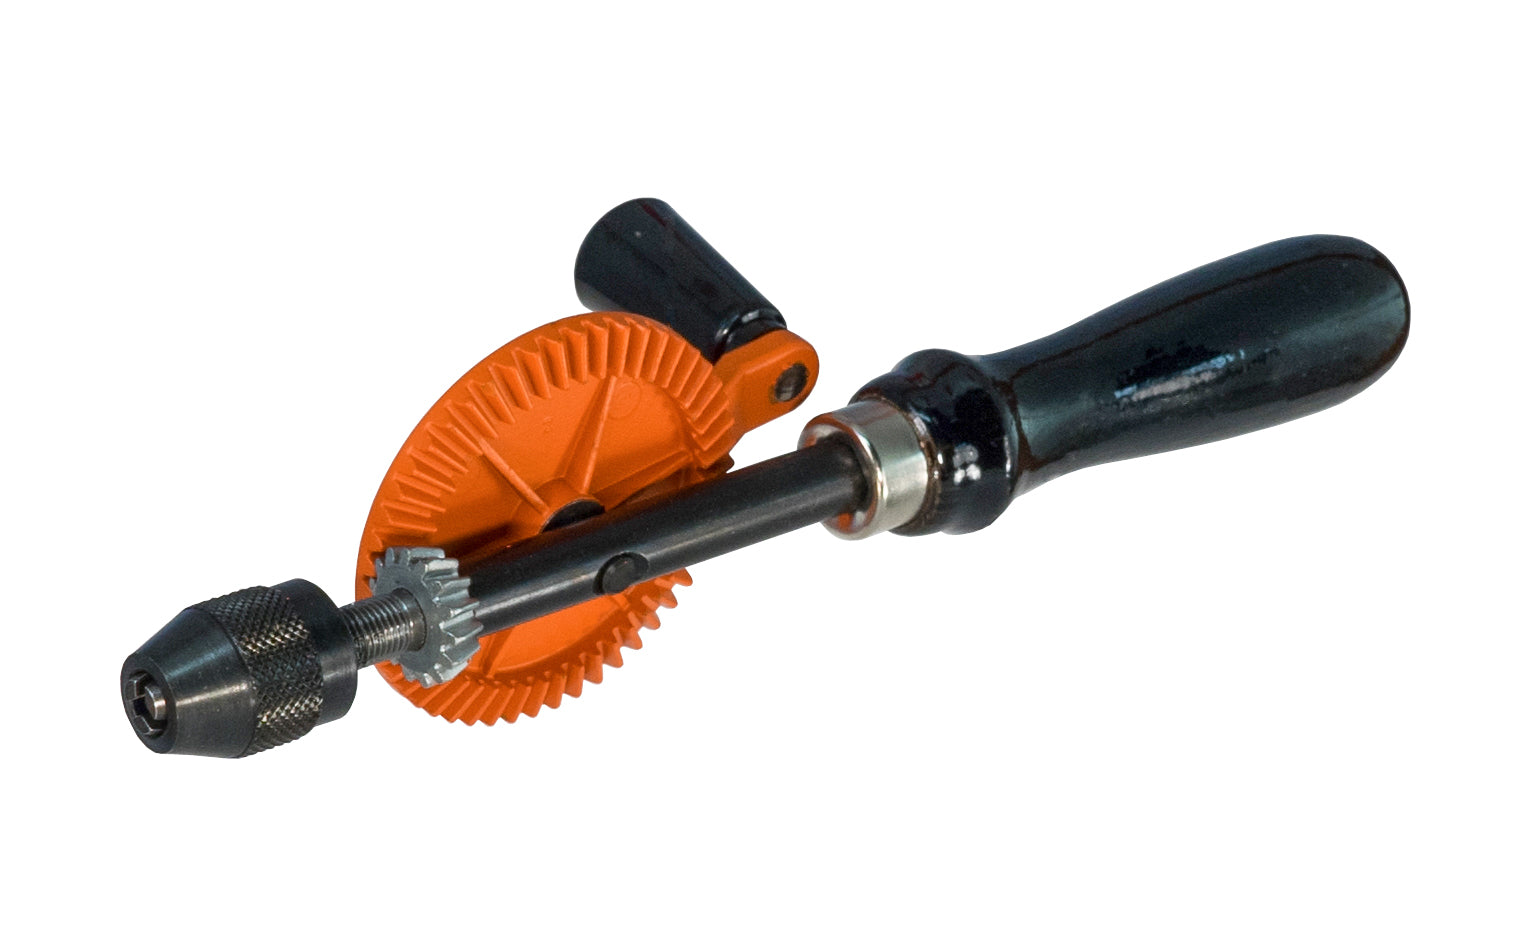 Schroeder 9-1/4" Hand Drill ~ 1/4" Chuck Capacity - Made in Germany - Schroeder ~ three-jaw chuck & a smooth-running single pinion gearing